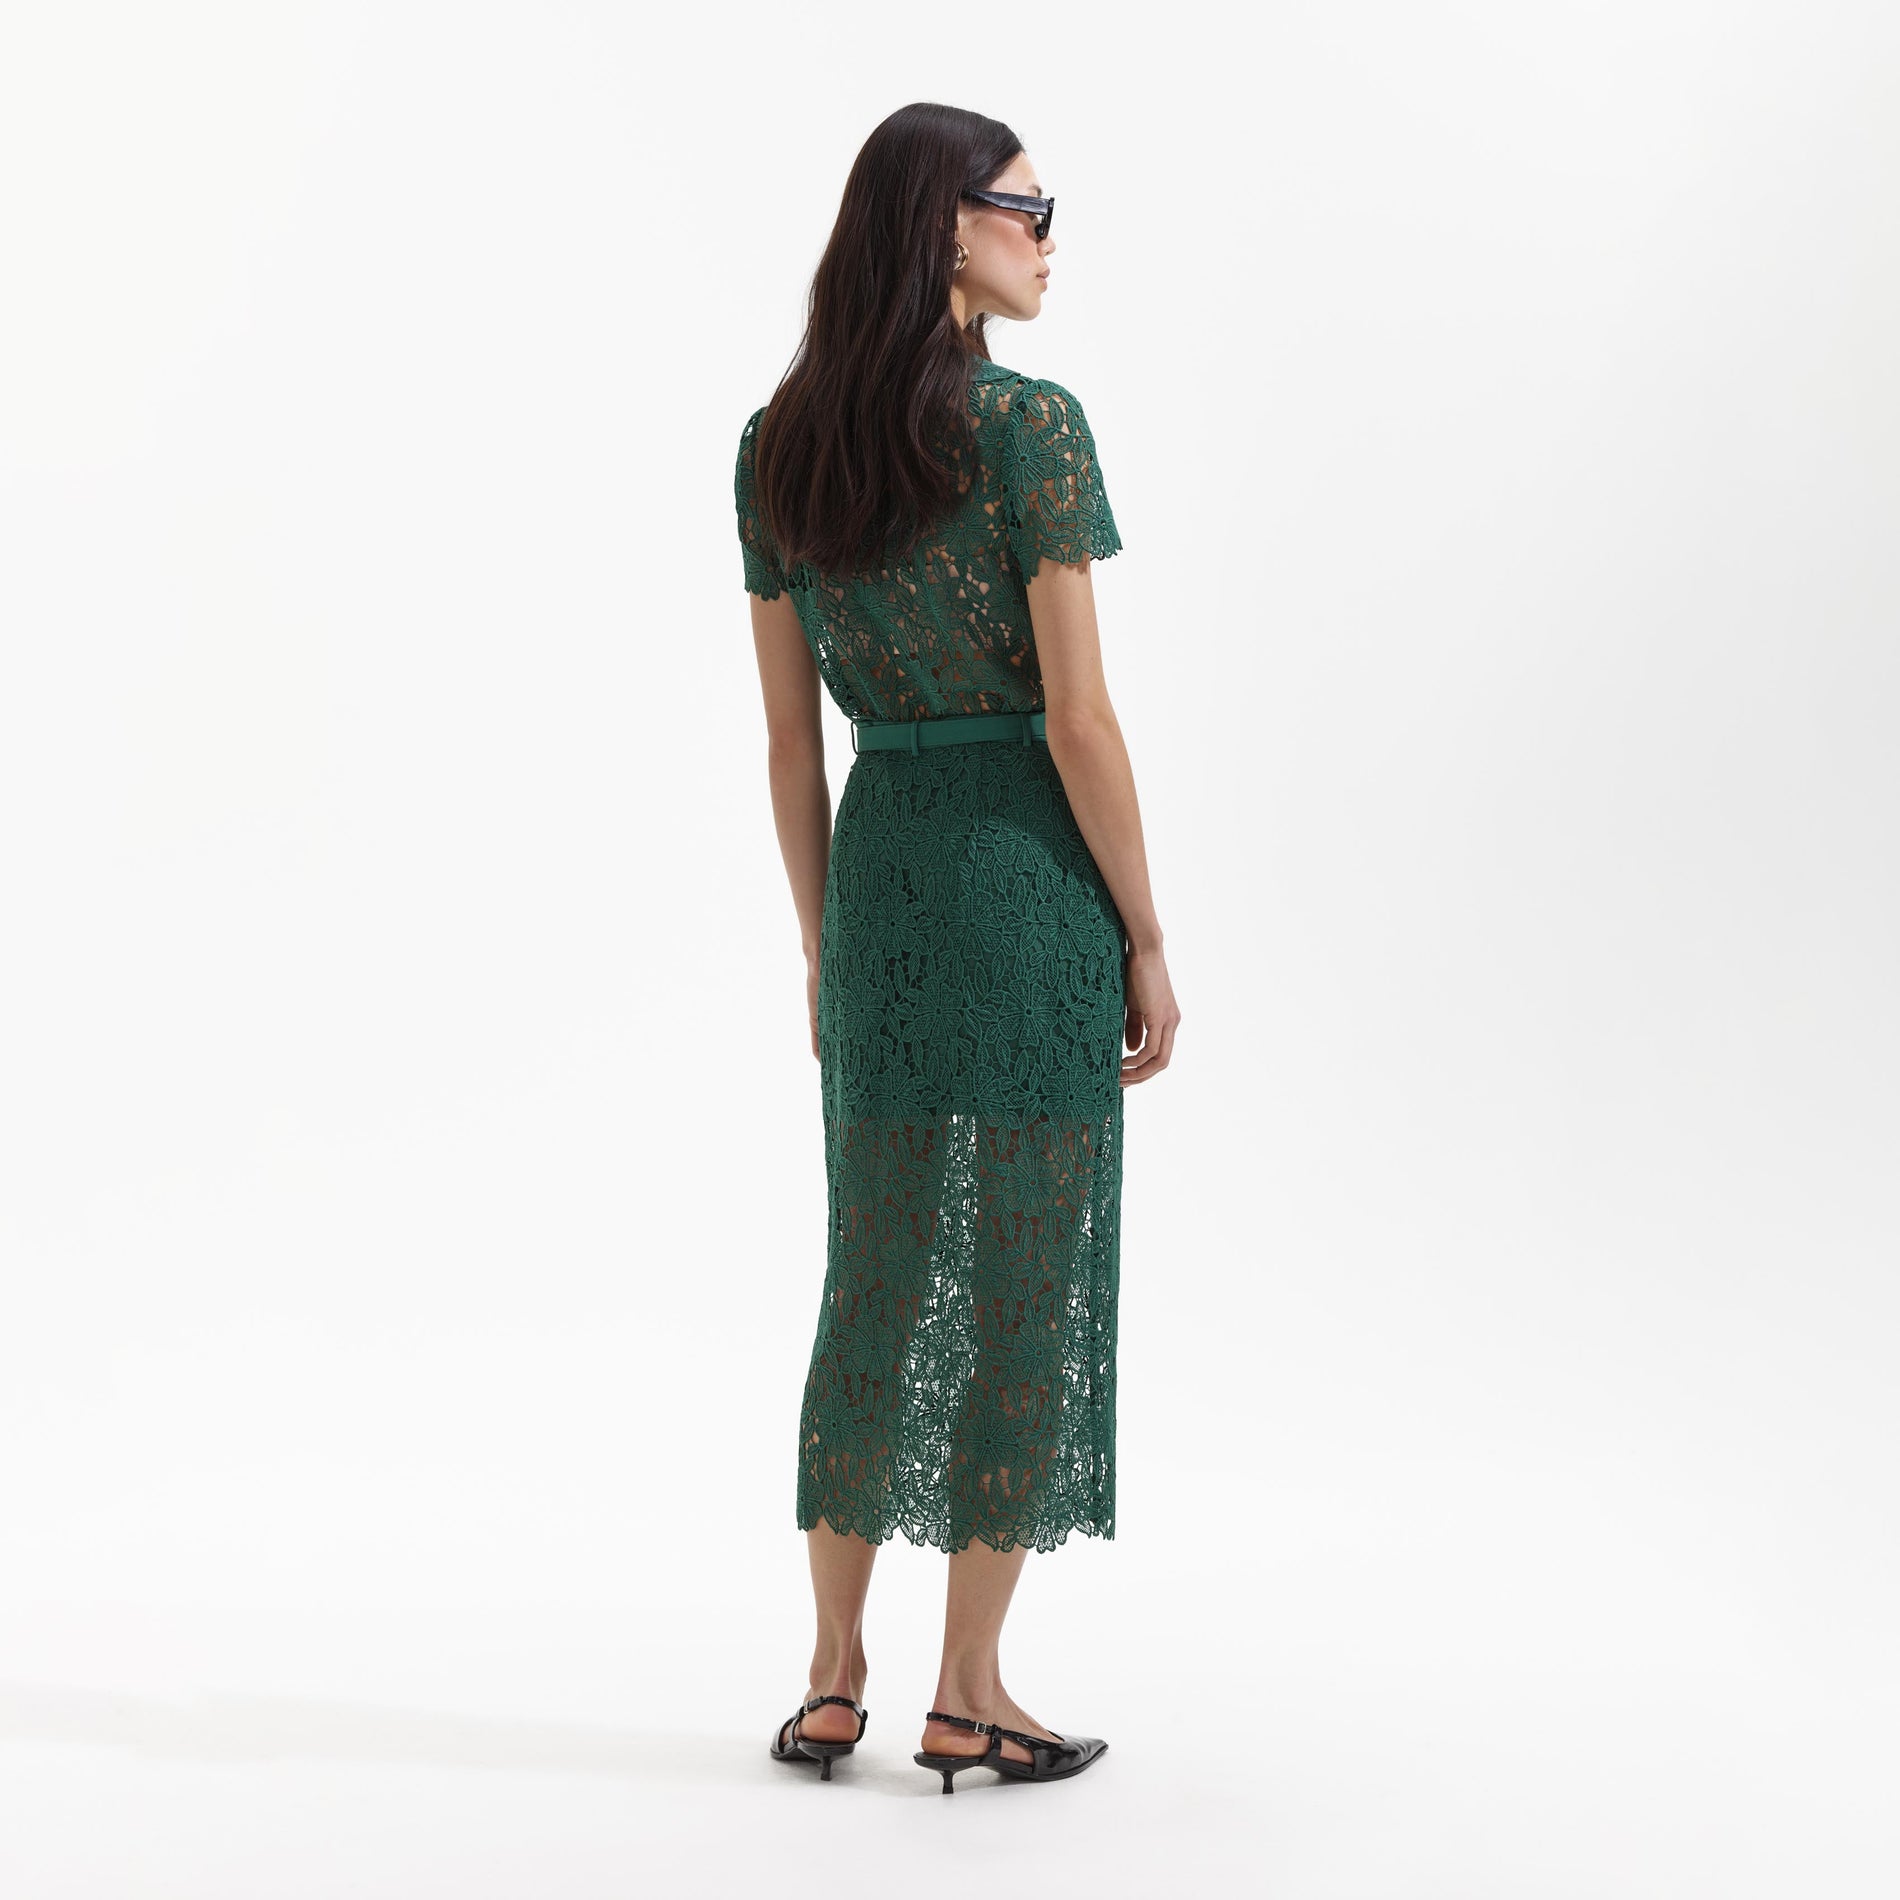 A Woman wearing the Green Guipure Lace Midi Skirt